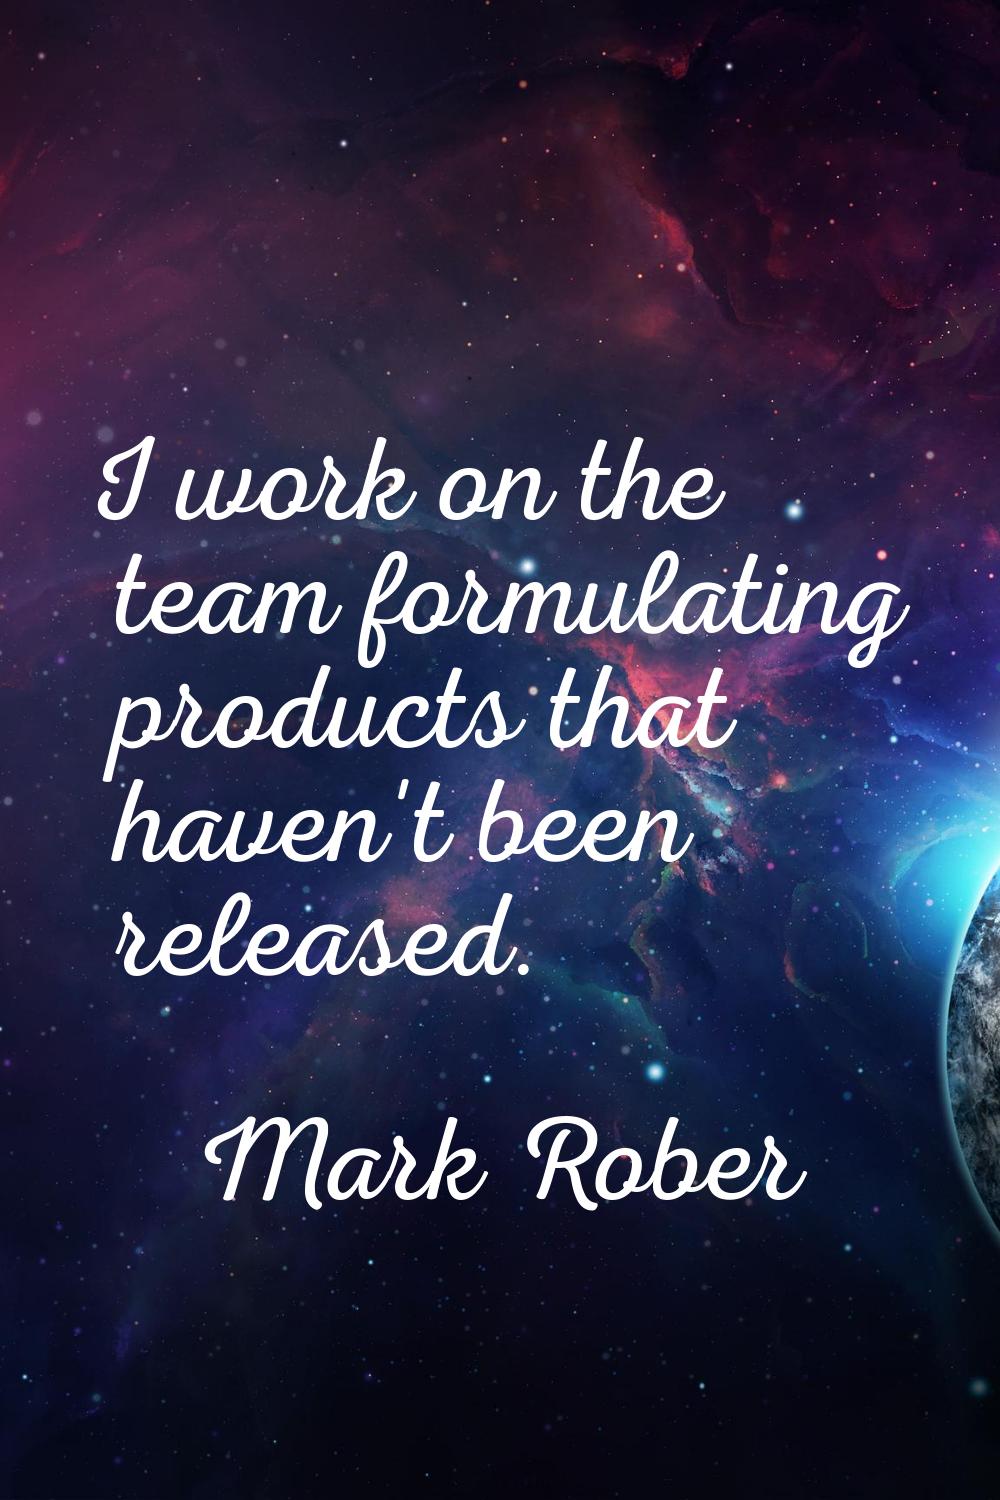 I work on the team formulating products that haven't been released.